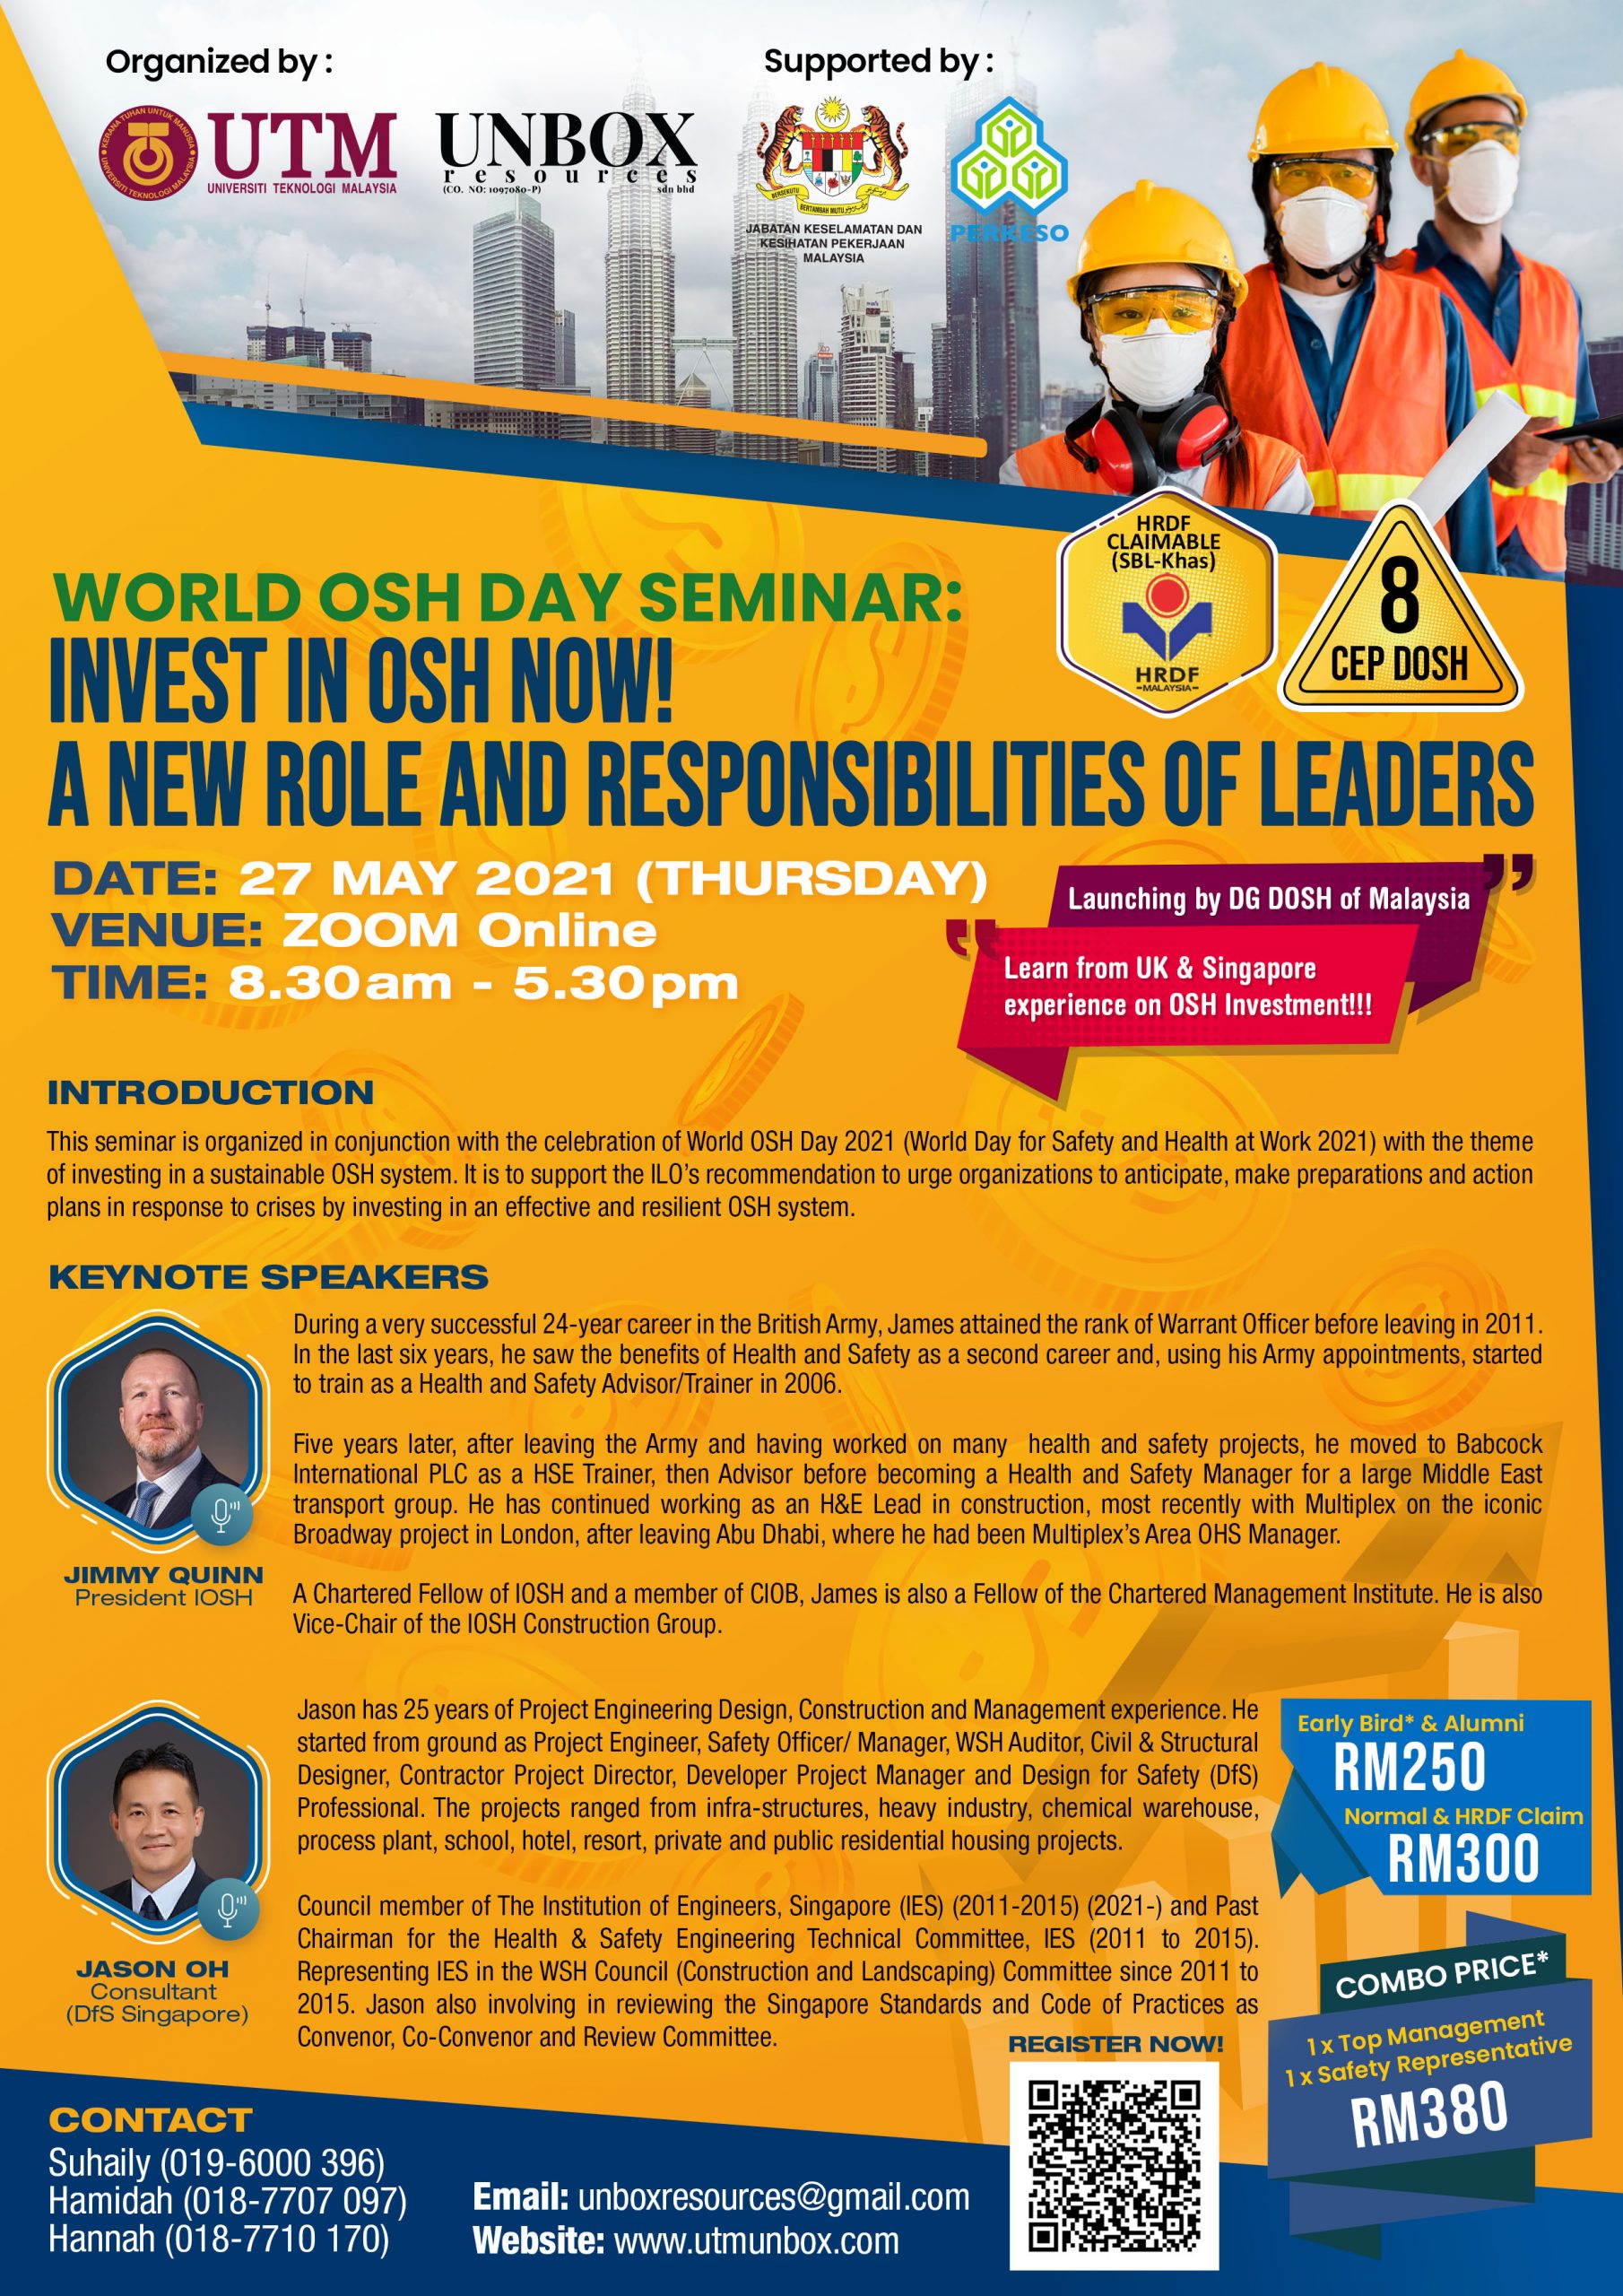 You are currently viewing WORLD OSH DAY SEMINAR: INVEST IN OSH NOW! A NEW ROLE AND RESPONSIBILITIES OF LEADERS